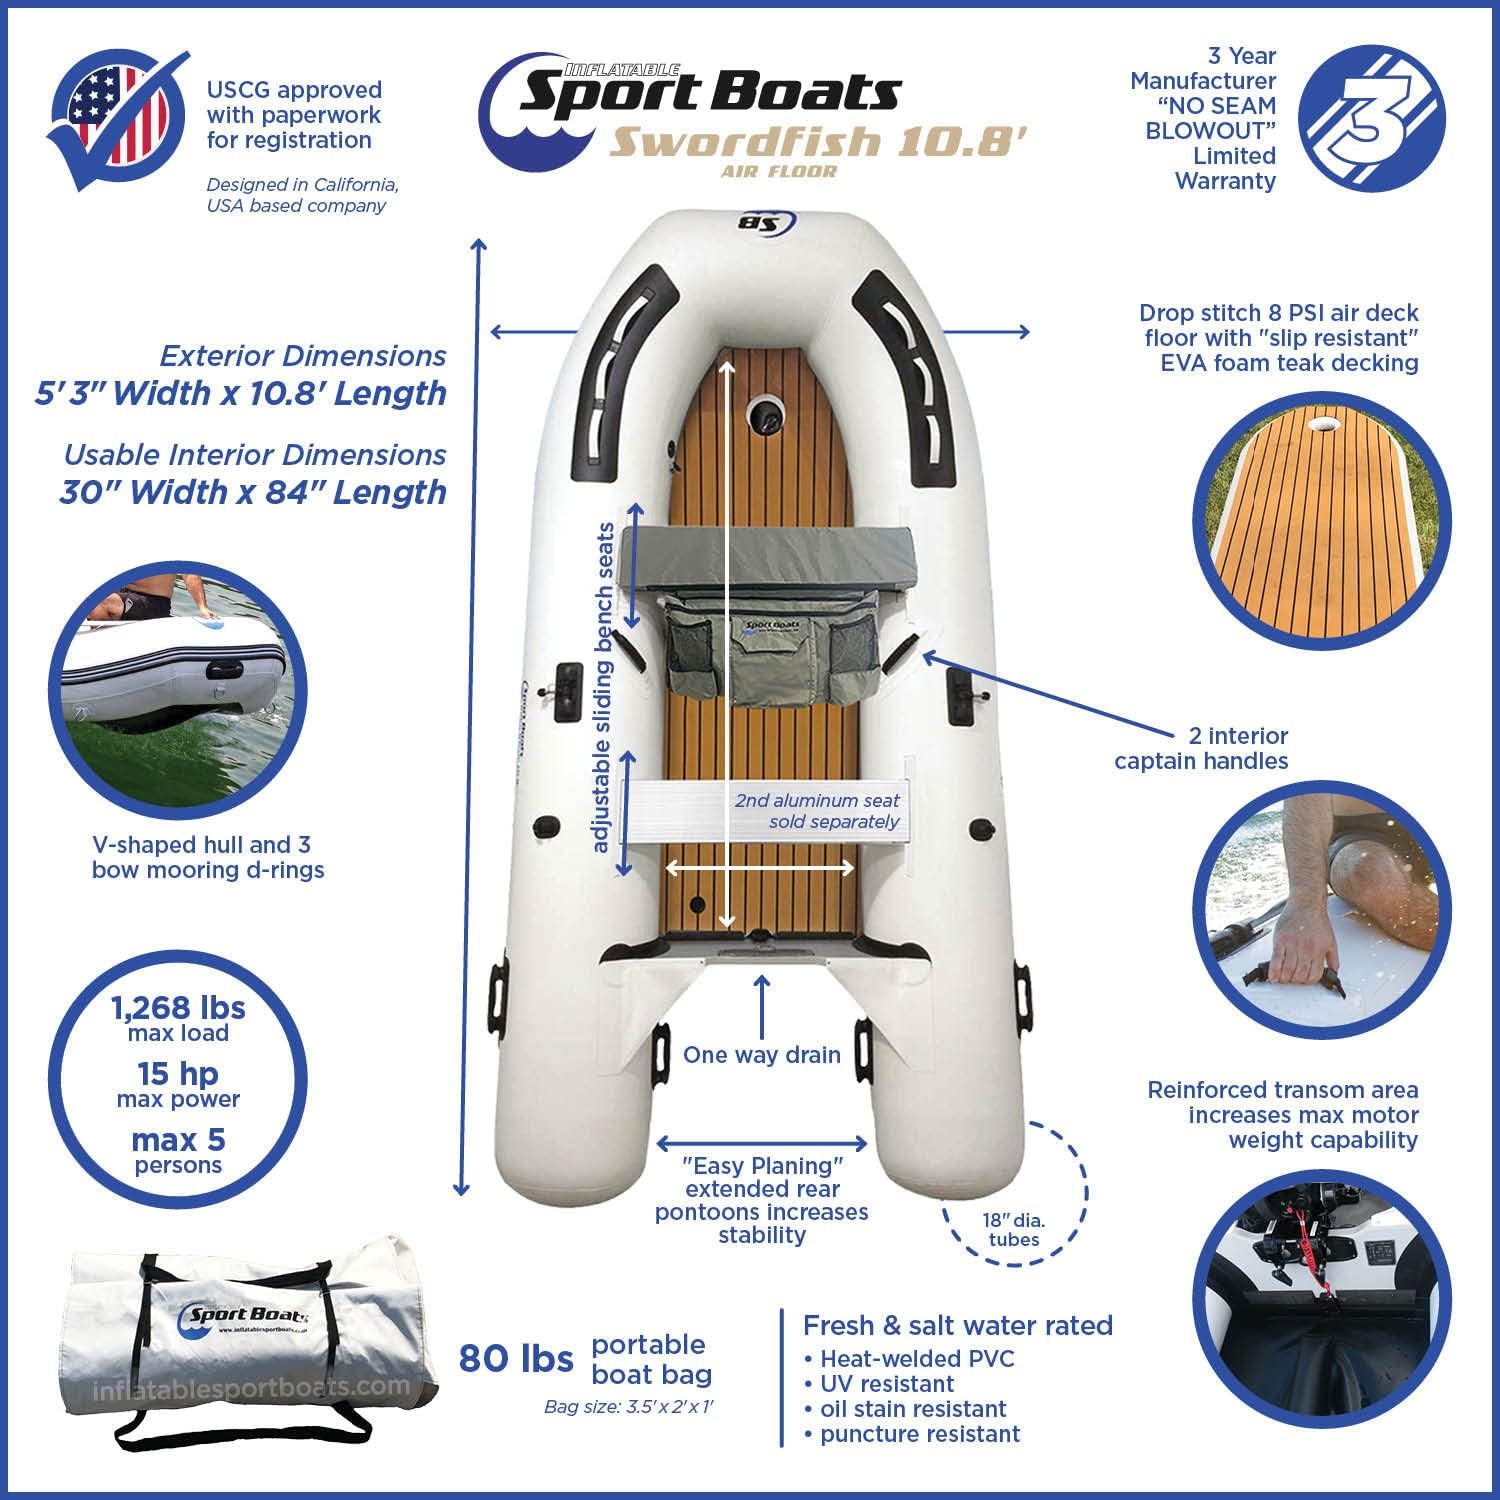 Inflatable Sport Boats Swordfish 10.8′ Review